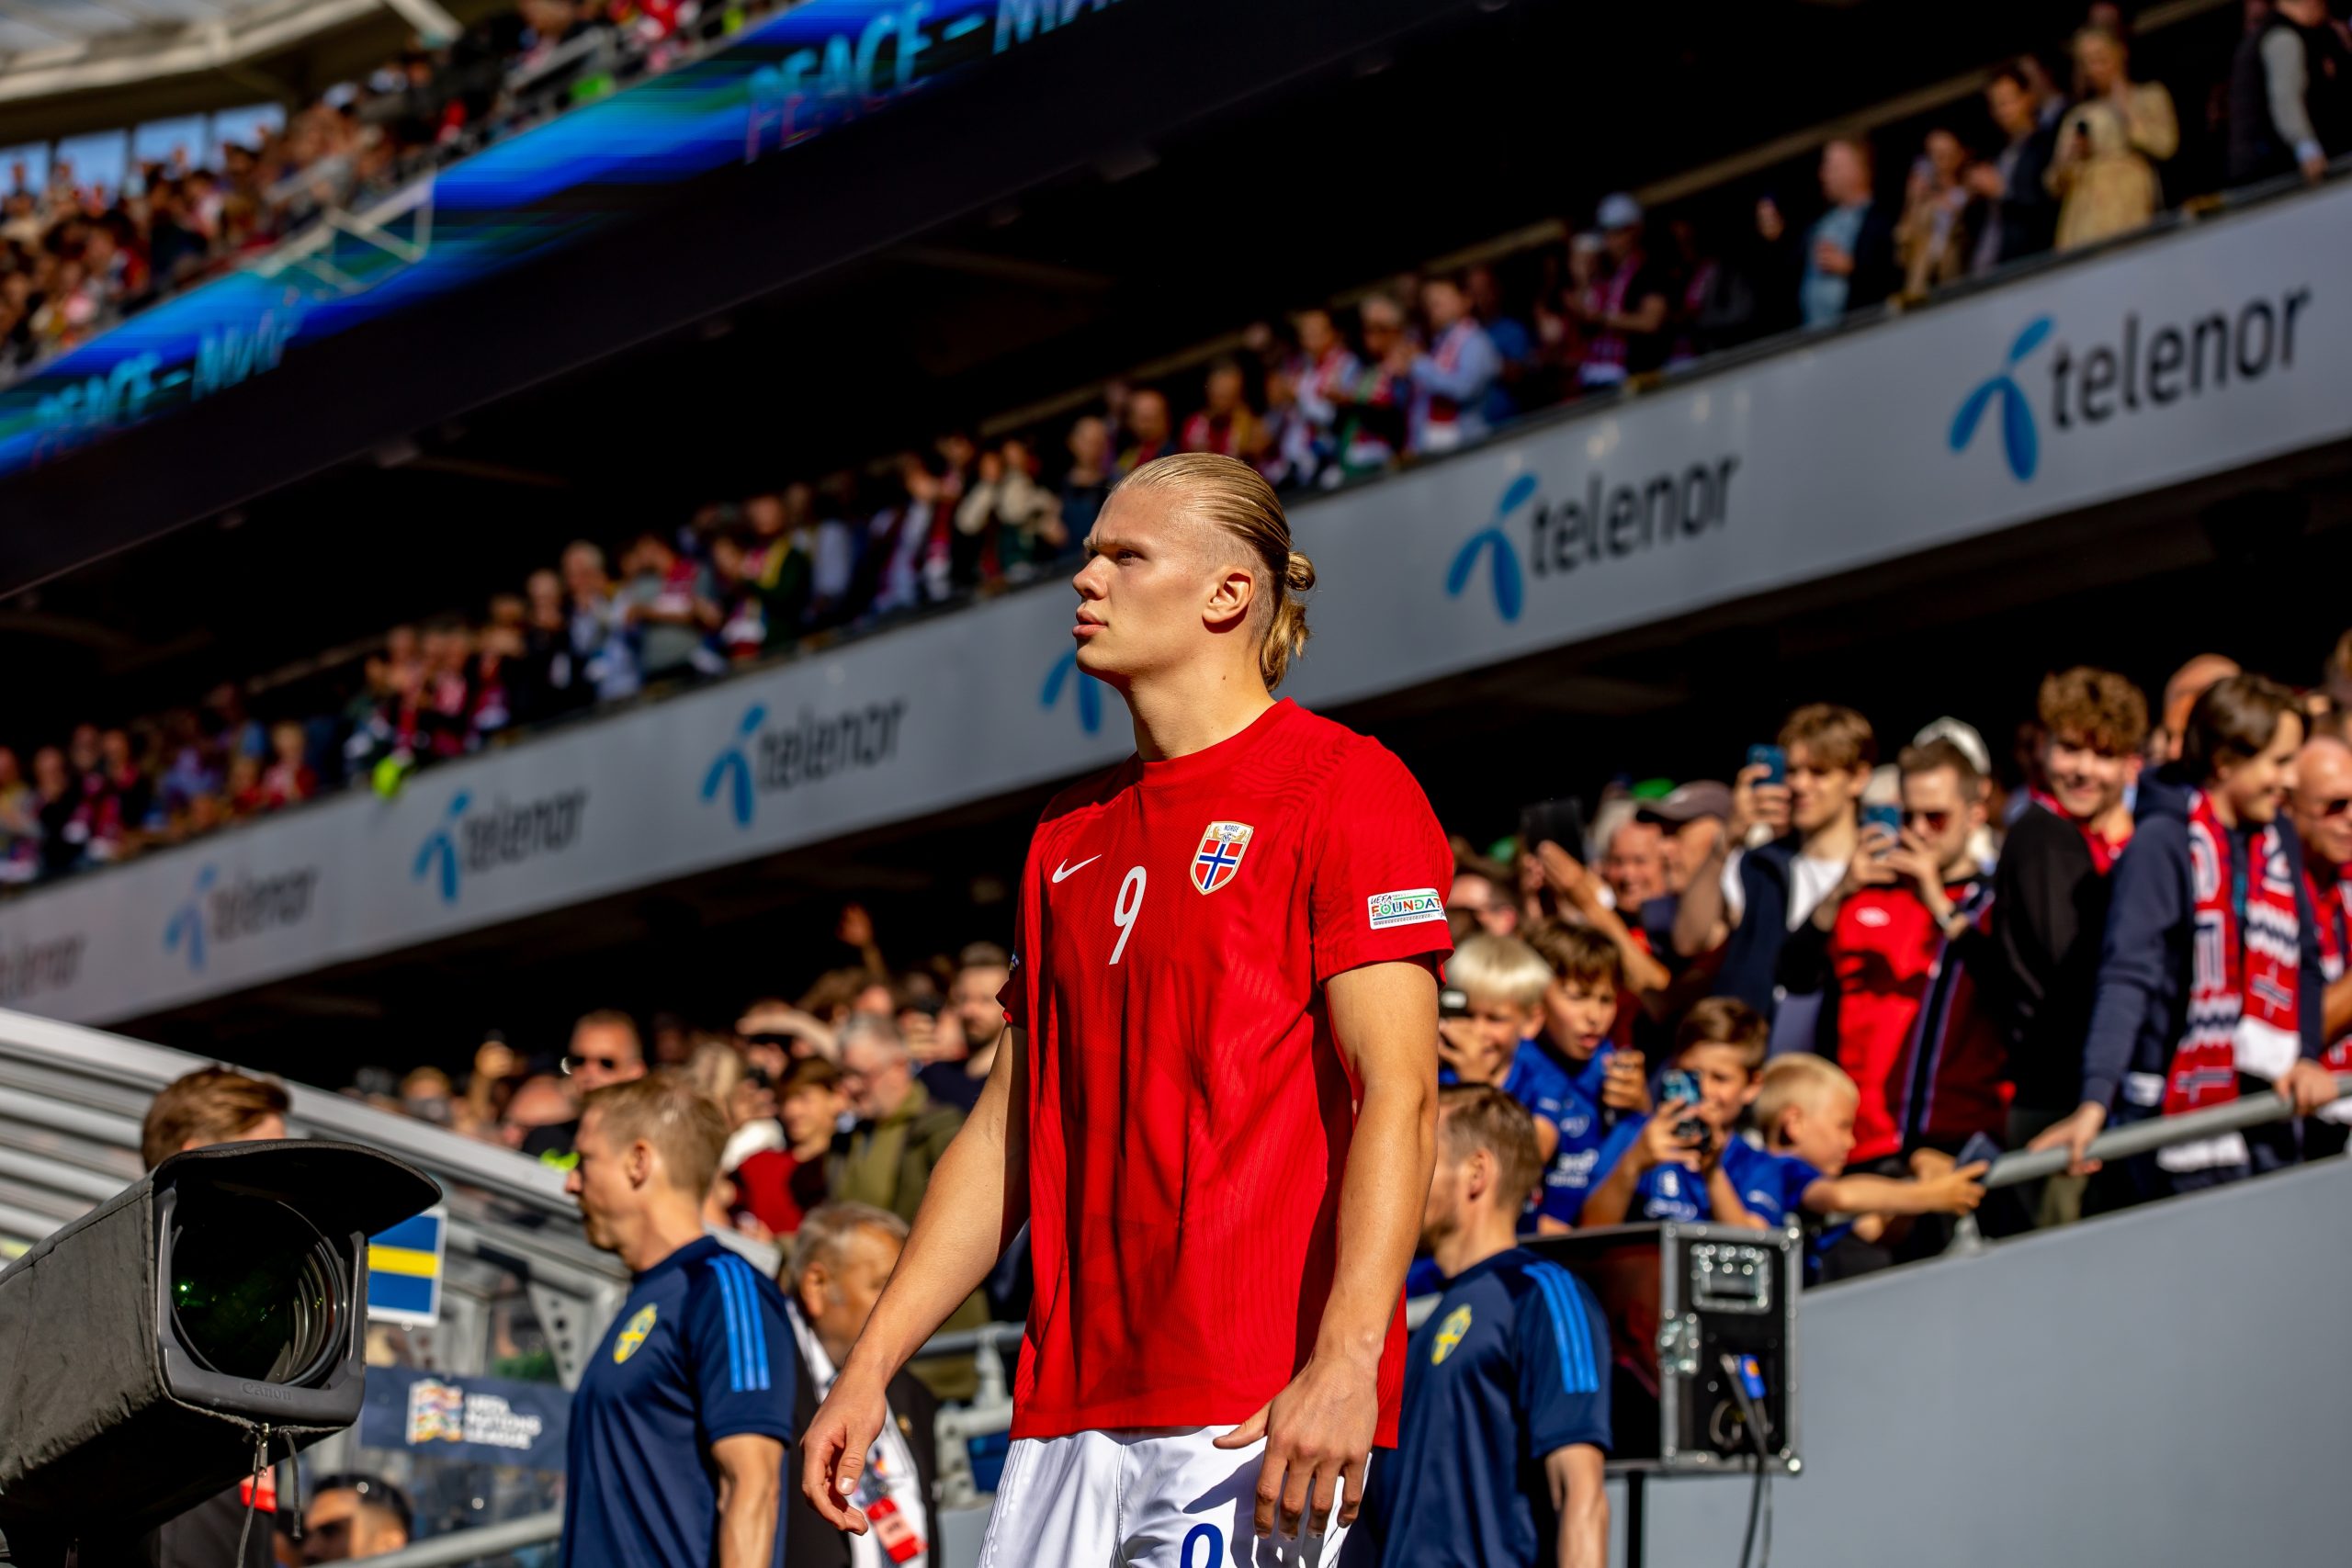 Will Erling Haaland help Norway make it to the 2026 World Cup?